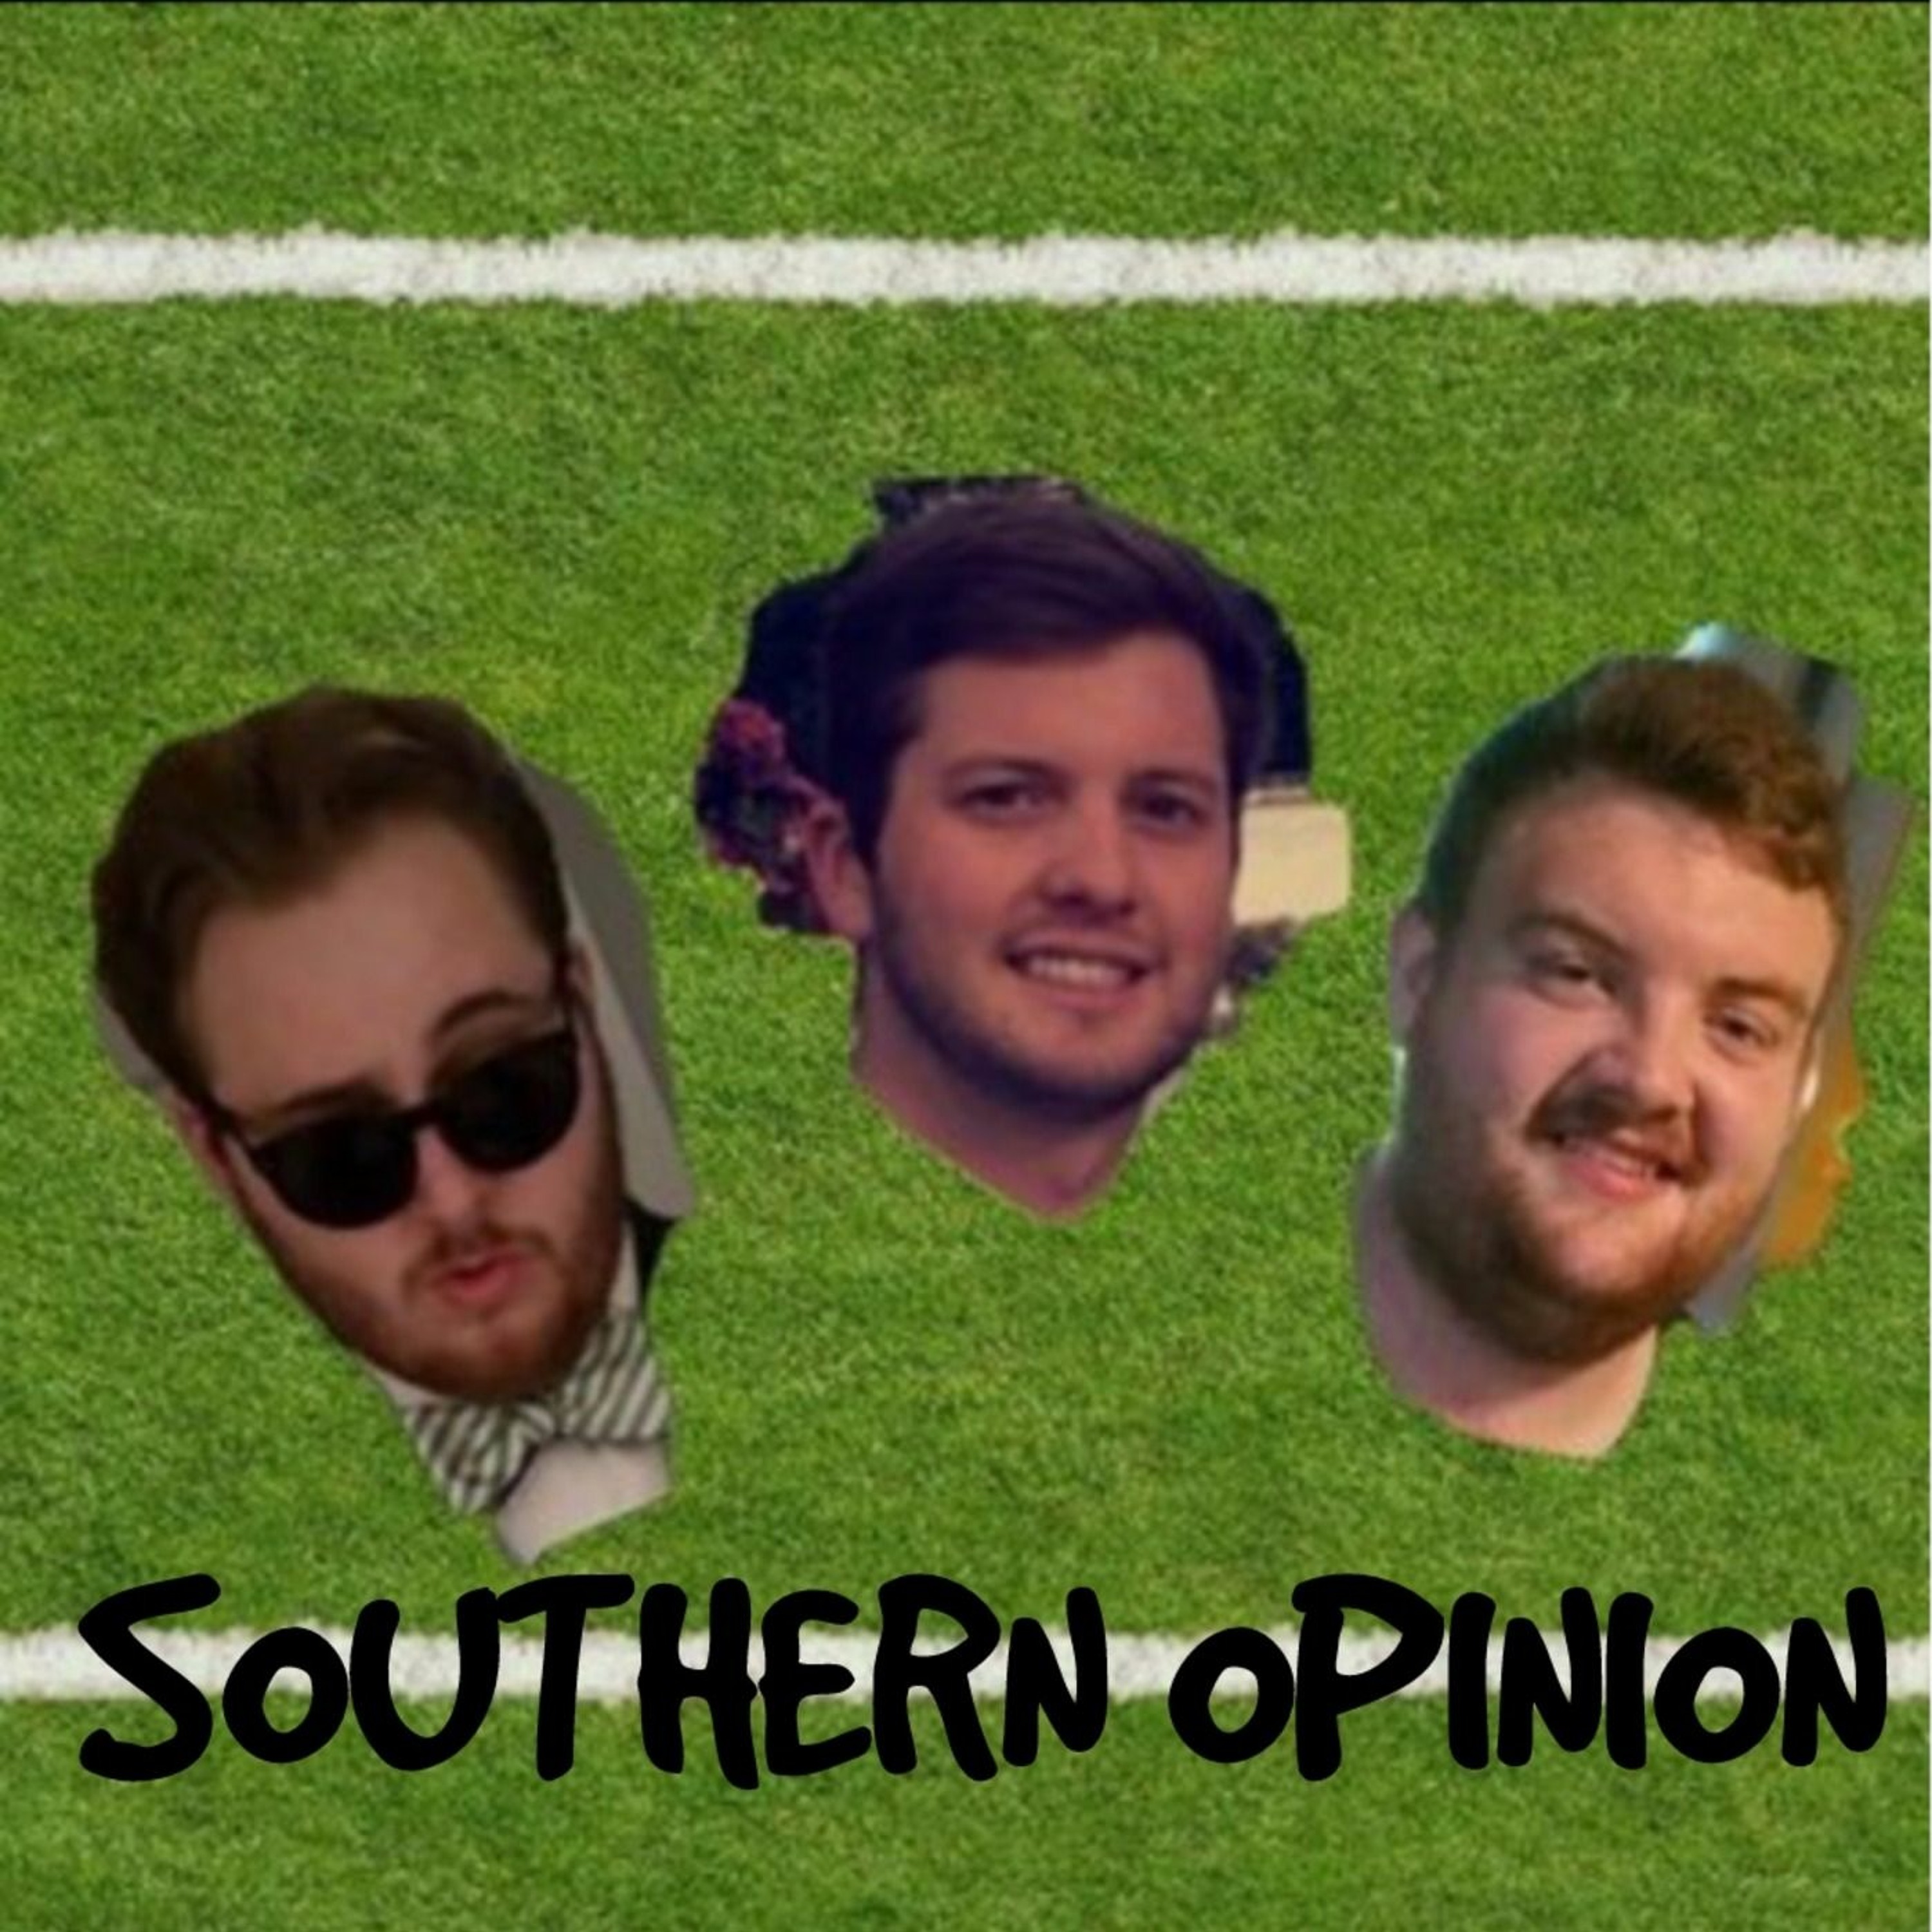 Southern Opinion-E5: Oh snap!